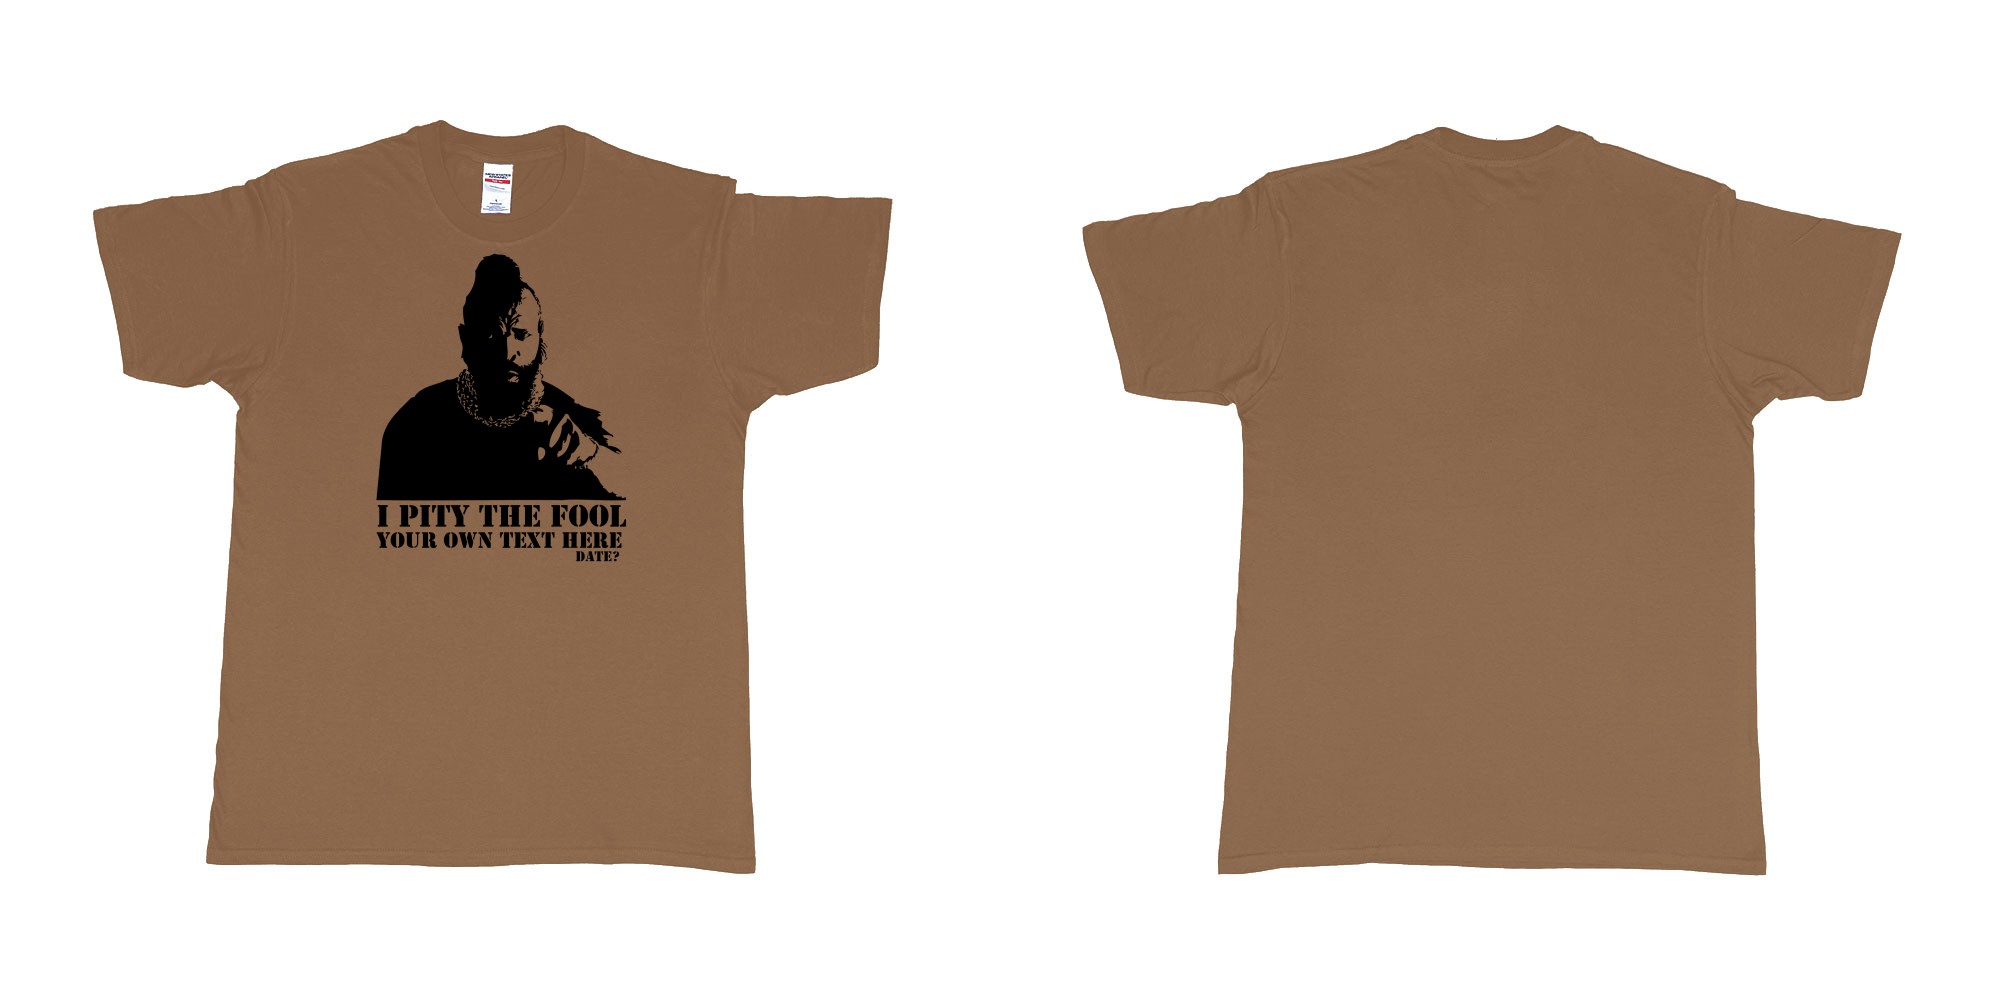 Custom tshirt design I pity the fool in fabric color chestnut choice your own text made in Bali by The Pirate Way